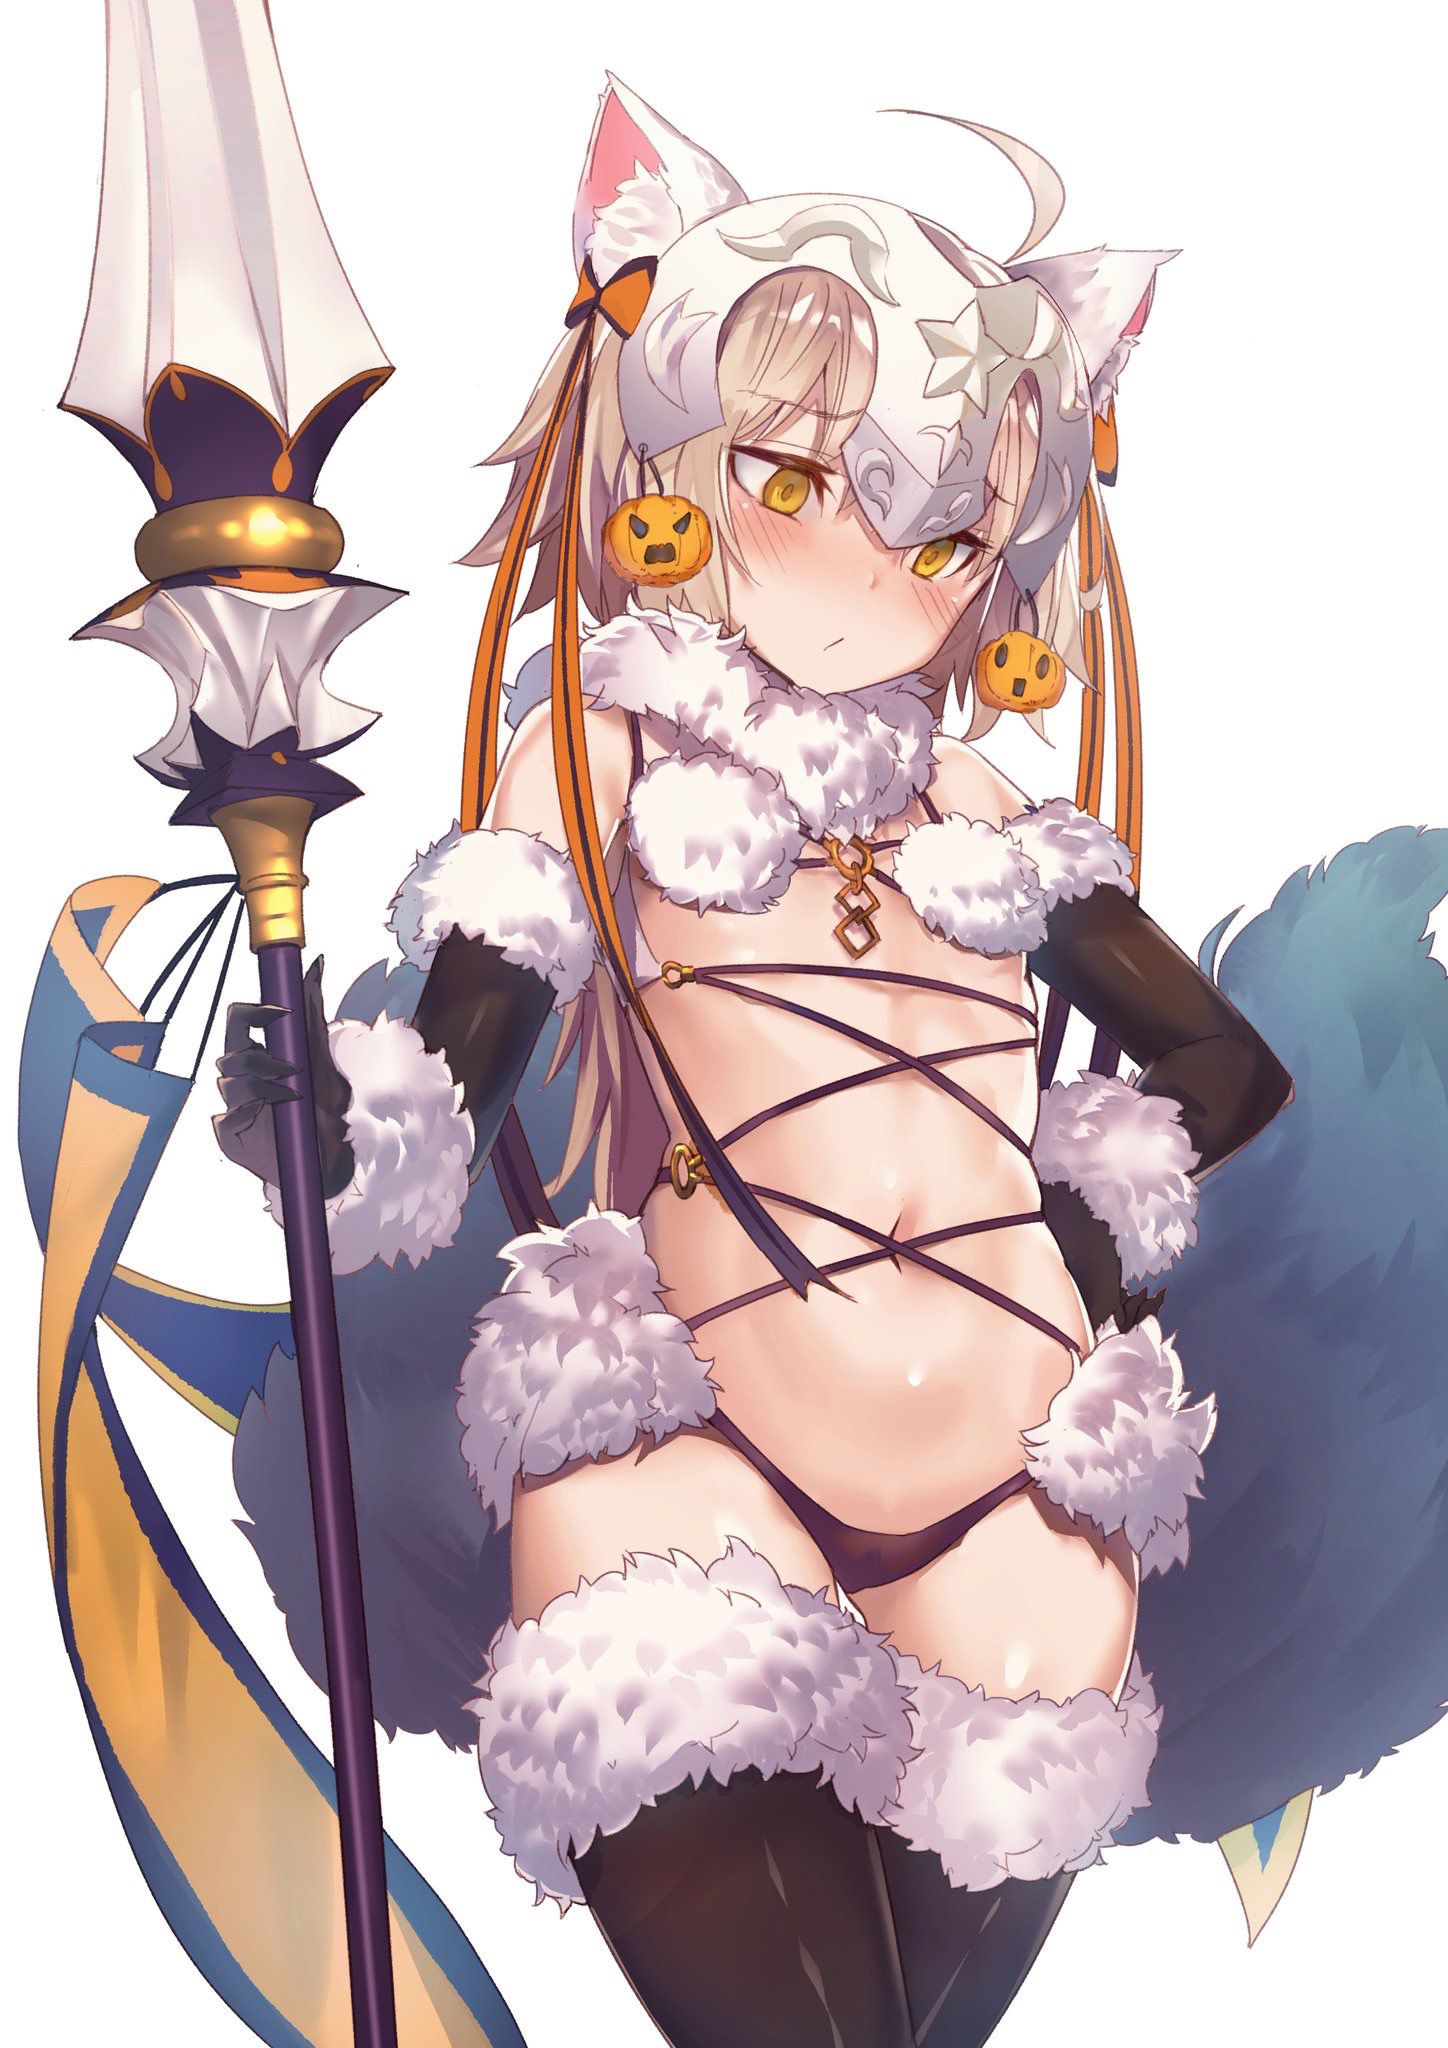 [Fate/GrandOrder (FGO)] secondary erotic images of female characters 3 60 photos 42